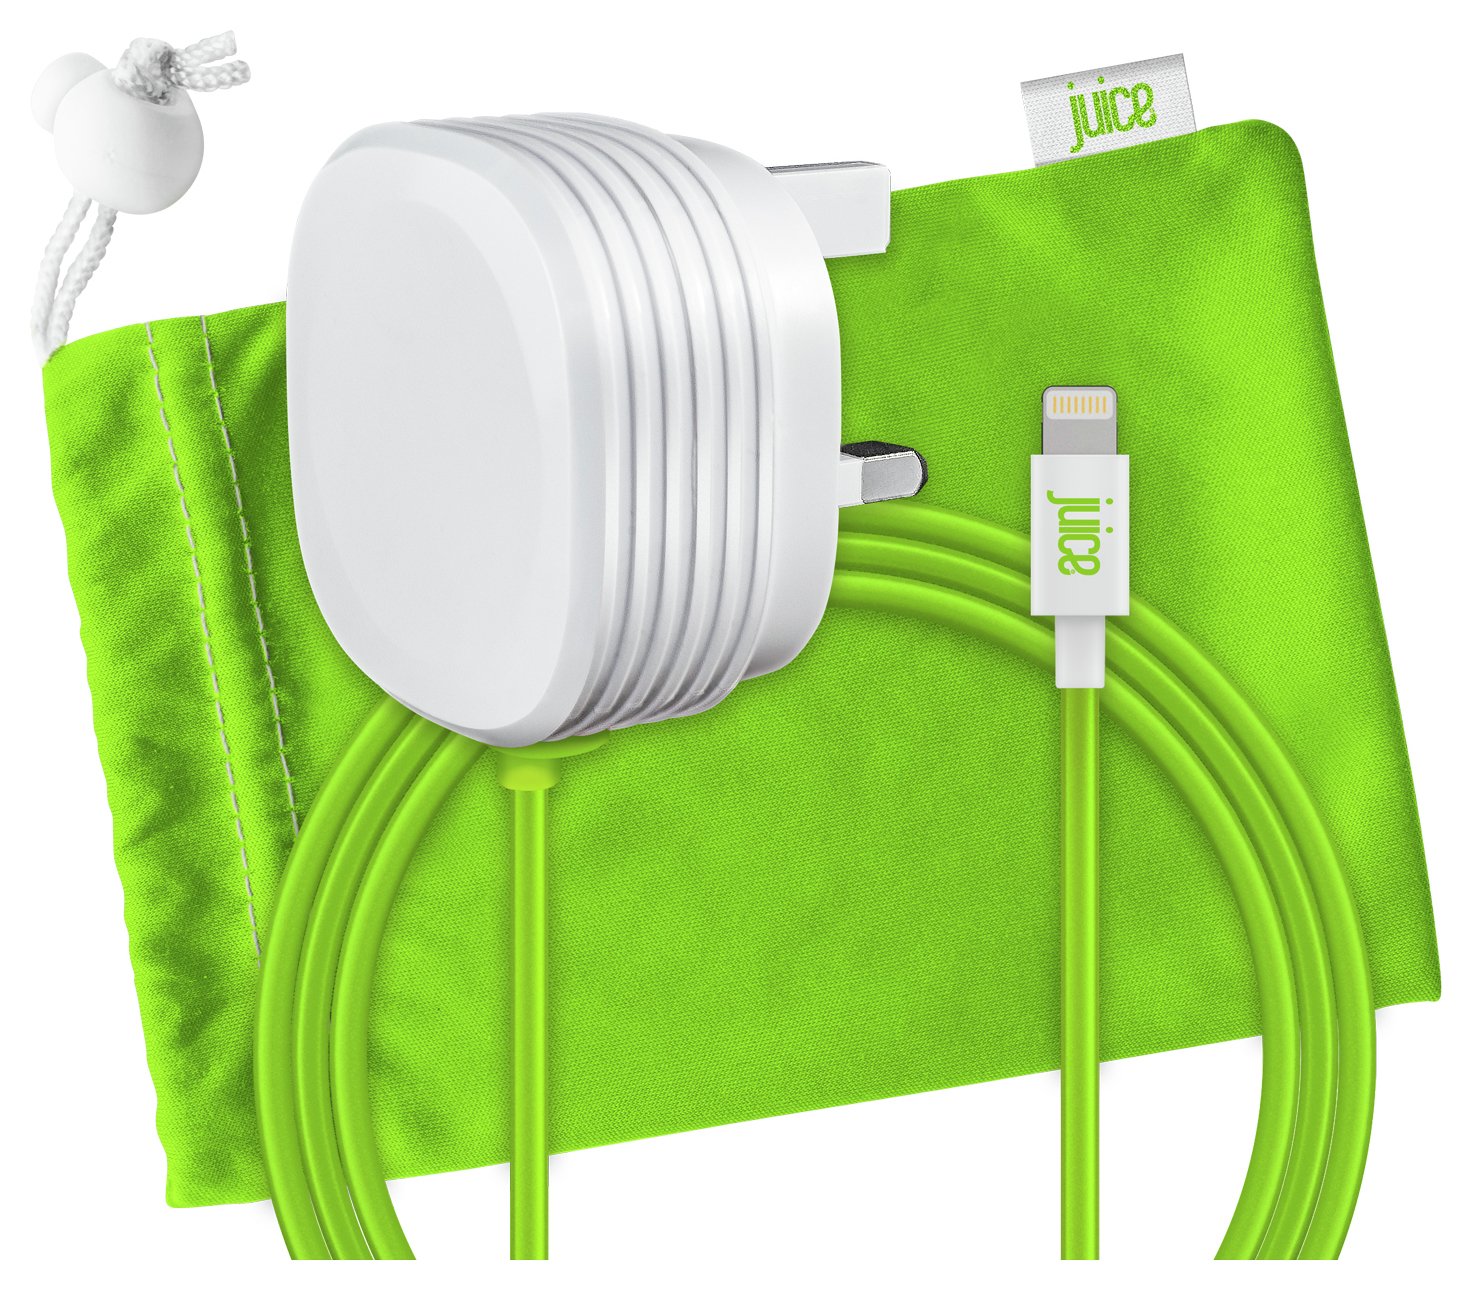 Juice Lightning Wall Charger Review